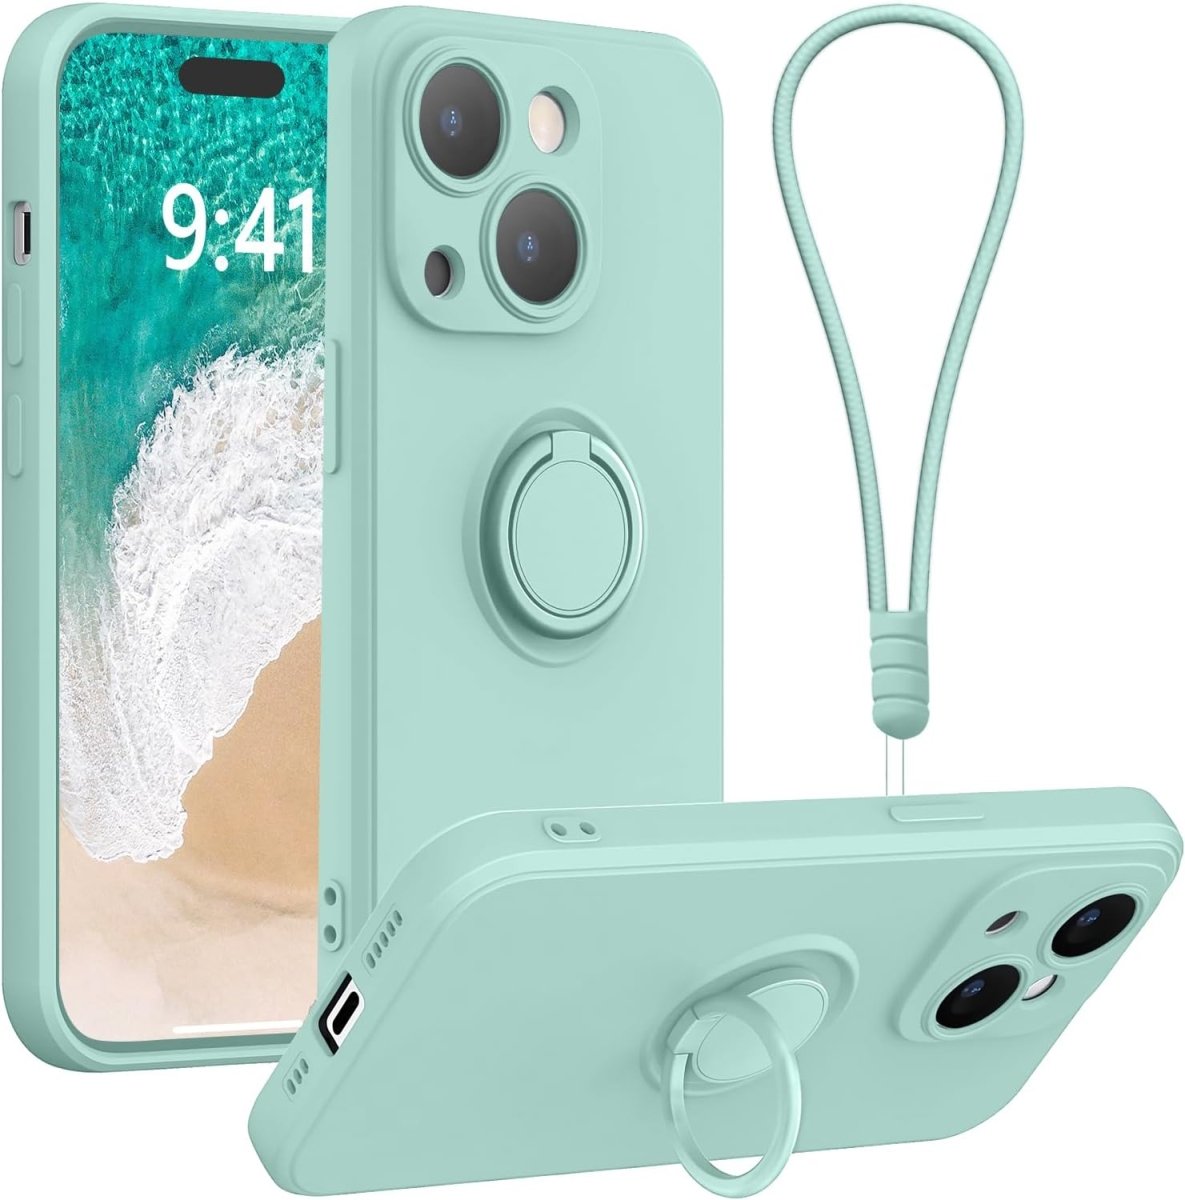 Mint Cream Shockproof Silicone Case For iPhone With Ring And Lanyard  Mint Cream iPhone 11 Accessories Gifts UK